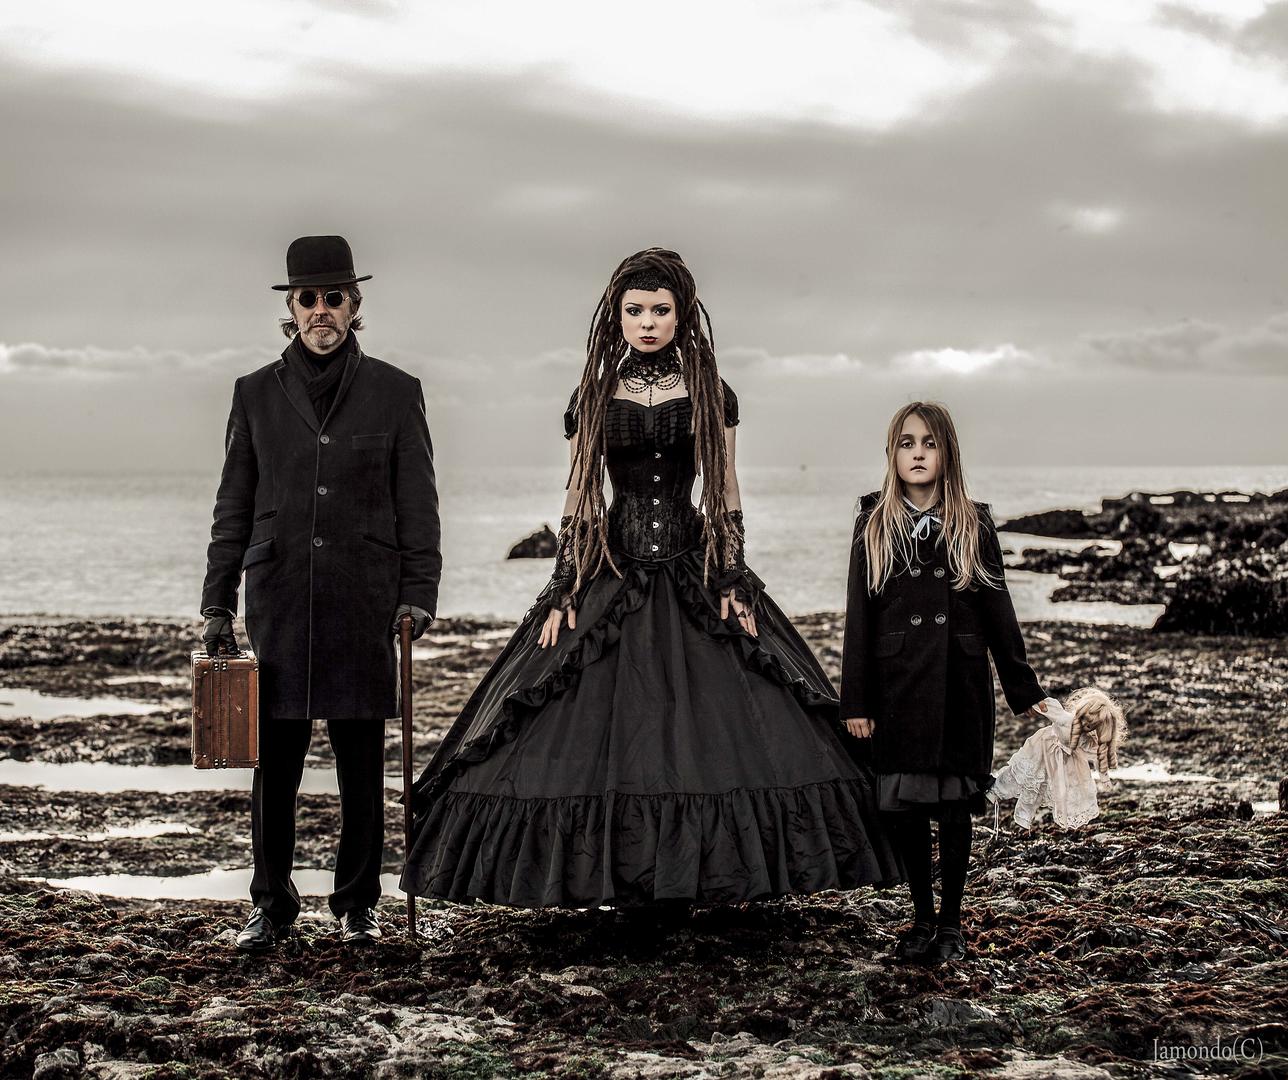 THe Gothic Family, © Jamie Sheehy, Crowd 2nd, FIX Photo Festival Awards